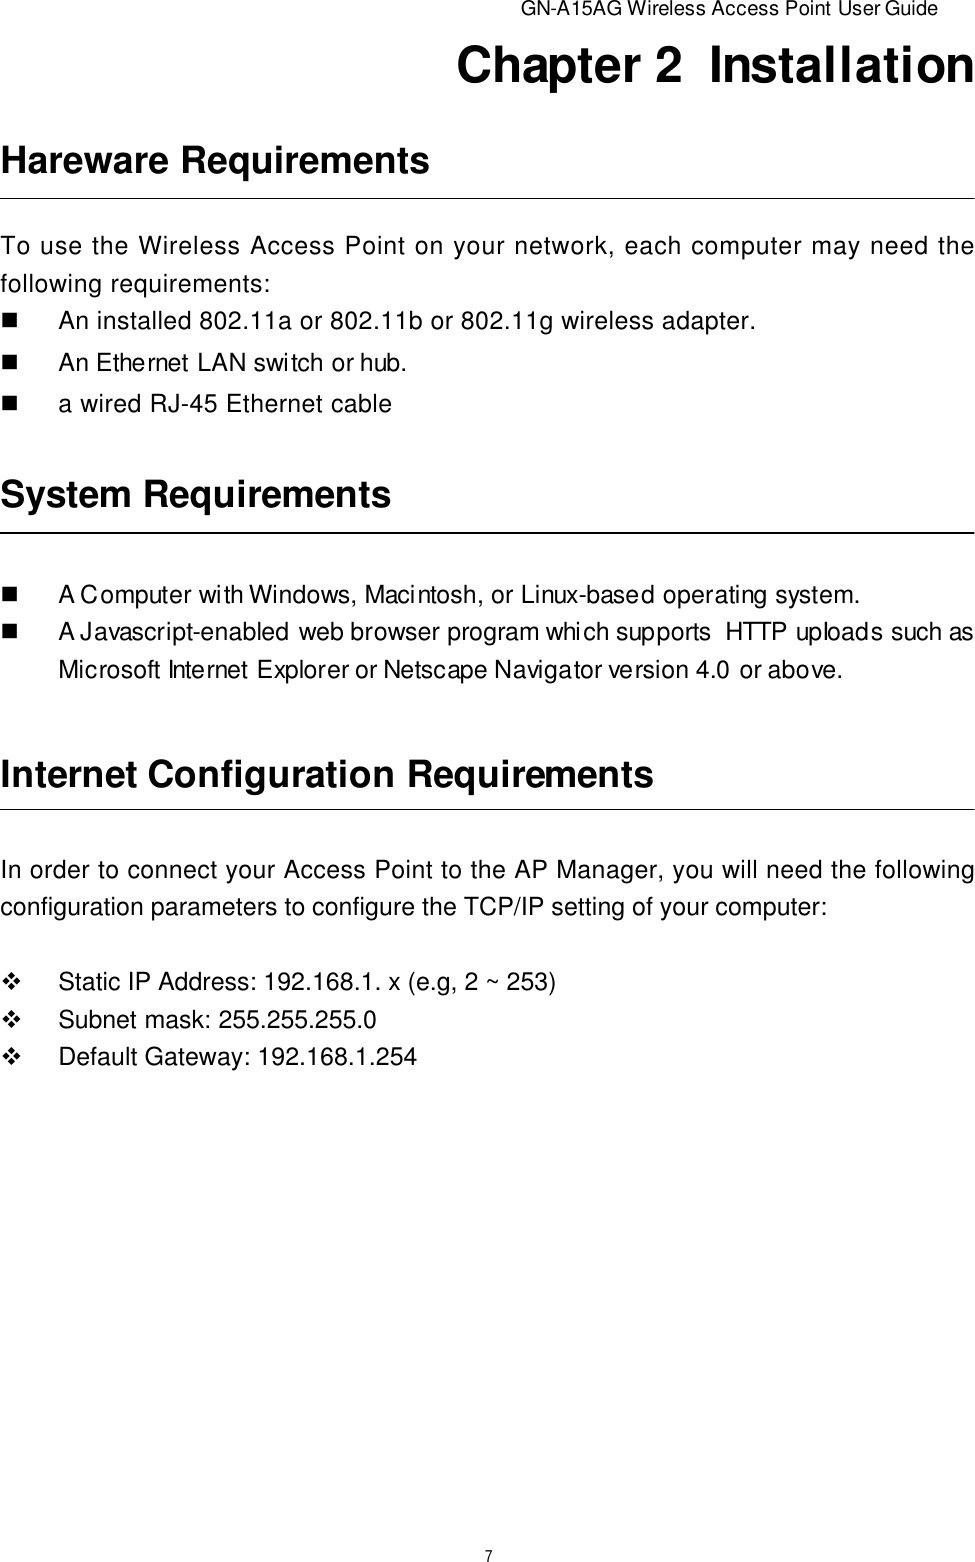                          GN-A15AG Wireless Access Point User Guide7Chapter 2  InstallationSystem RequirementsnA Computer with Windows, Macintosh, or Linux-based operating system.nA Javascript-enabled web browser program which supports  HTTP upIoads such asMicrosoft Internet Explorer or Netscape Navigator version 4.0 or above.Internet Configuration RequirementsIn order to connect your Access Point to the AP Manager, you will need the followingconfiguration parameters to configure the TCP/IP setting of your computer:vStatic IP Address: 192.168.1. x (e.g, 2 ~ 253)vSubnet mask: 255.255.255.0vDefault Gateway: 192.168.1.254Hareware RequirementsTo use the Wireless Access Point on your network, each computer may need thefollowing requirements:nAn installed 802.11a or 802.11b or 802.11g wireless adapter.nAn Ethernet LAN switch or hub.na wired RJ-45 Ethernet cable